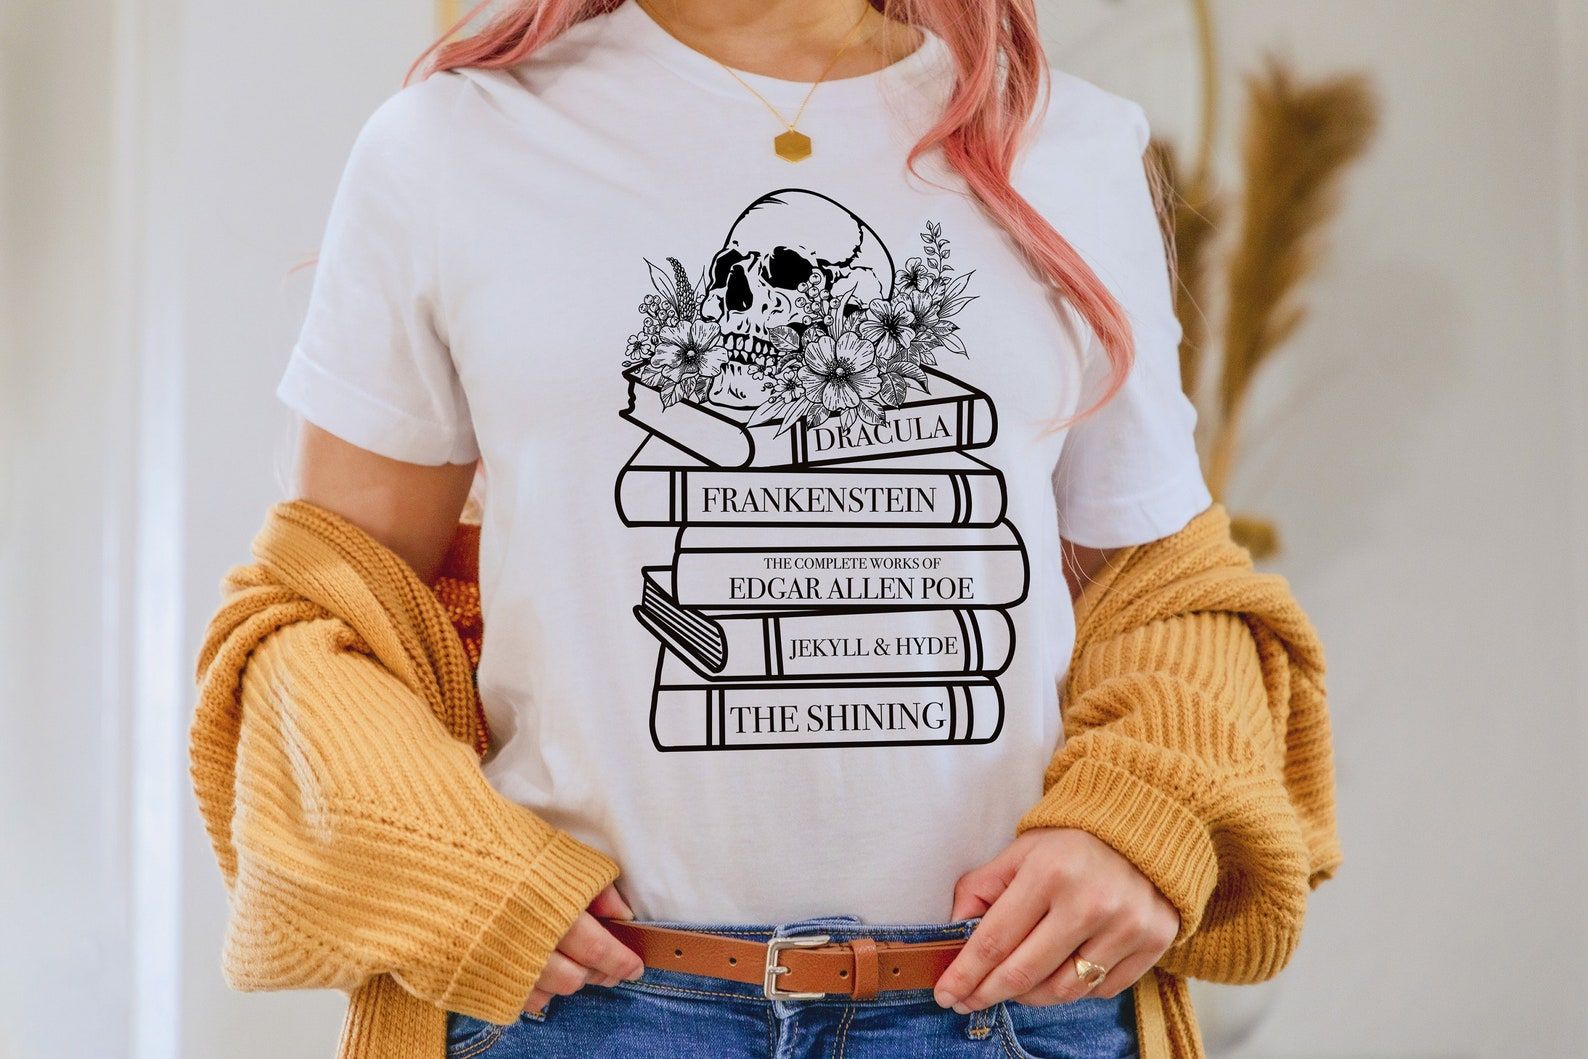 A white t-shirt with a stack of book spines featuring Dracula, Frankenstein, The Shining, Edgar Allan Poe, Jekyll and Hyde, with a skull and flowers on toy.